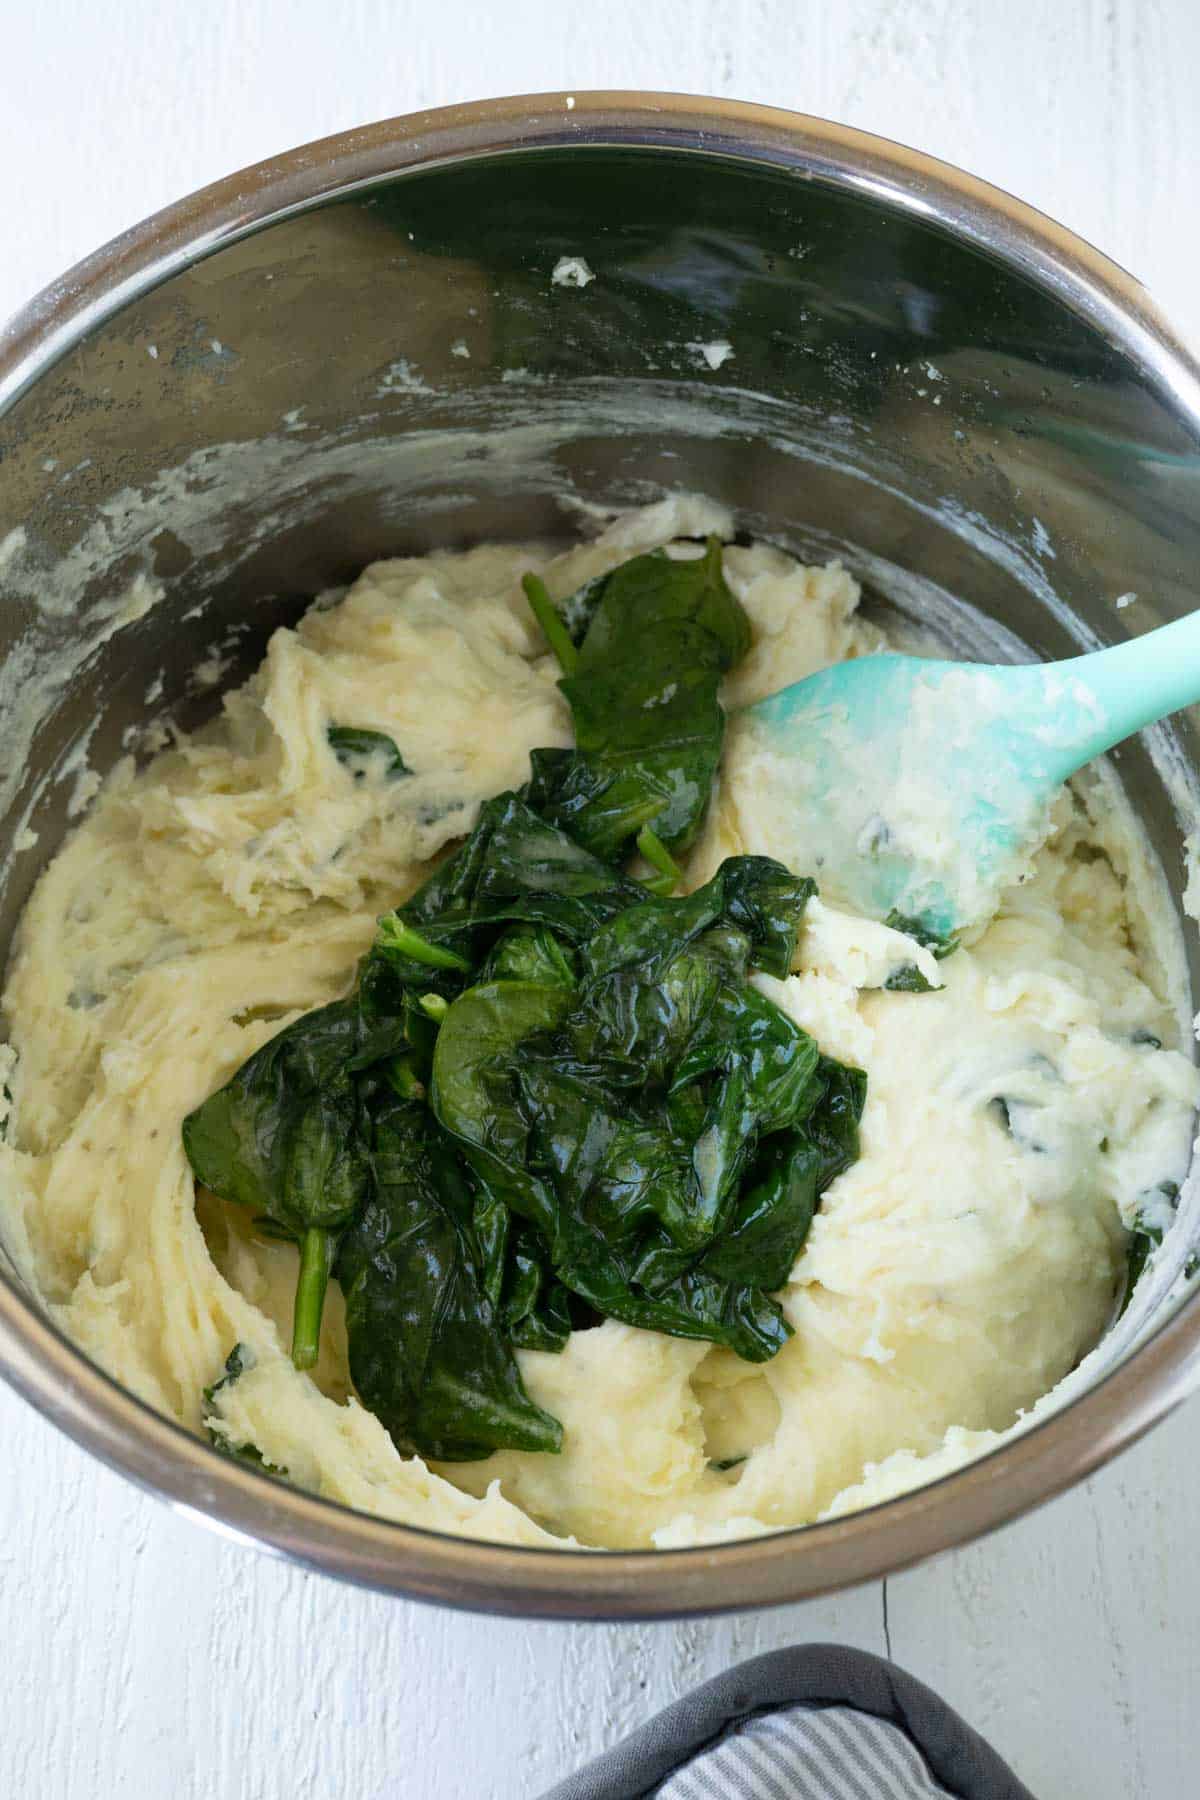 Sauteed spinach and mashed potatoes in a pressure cooker.